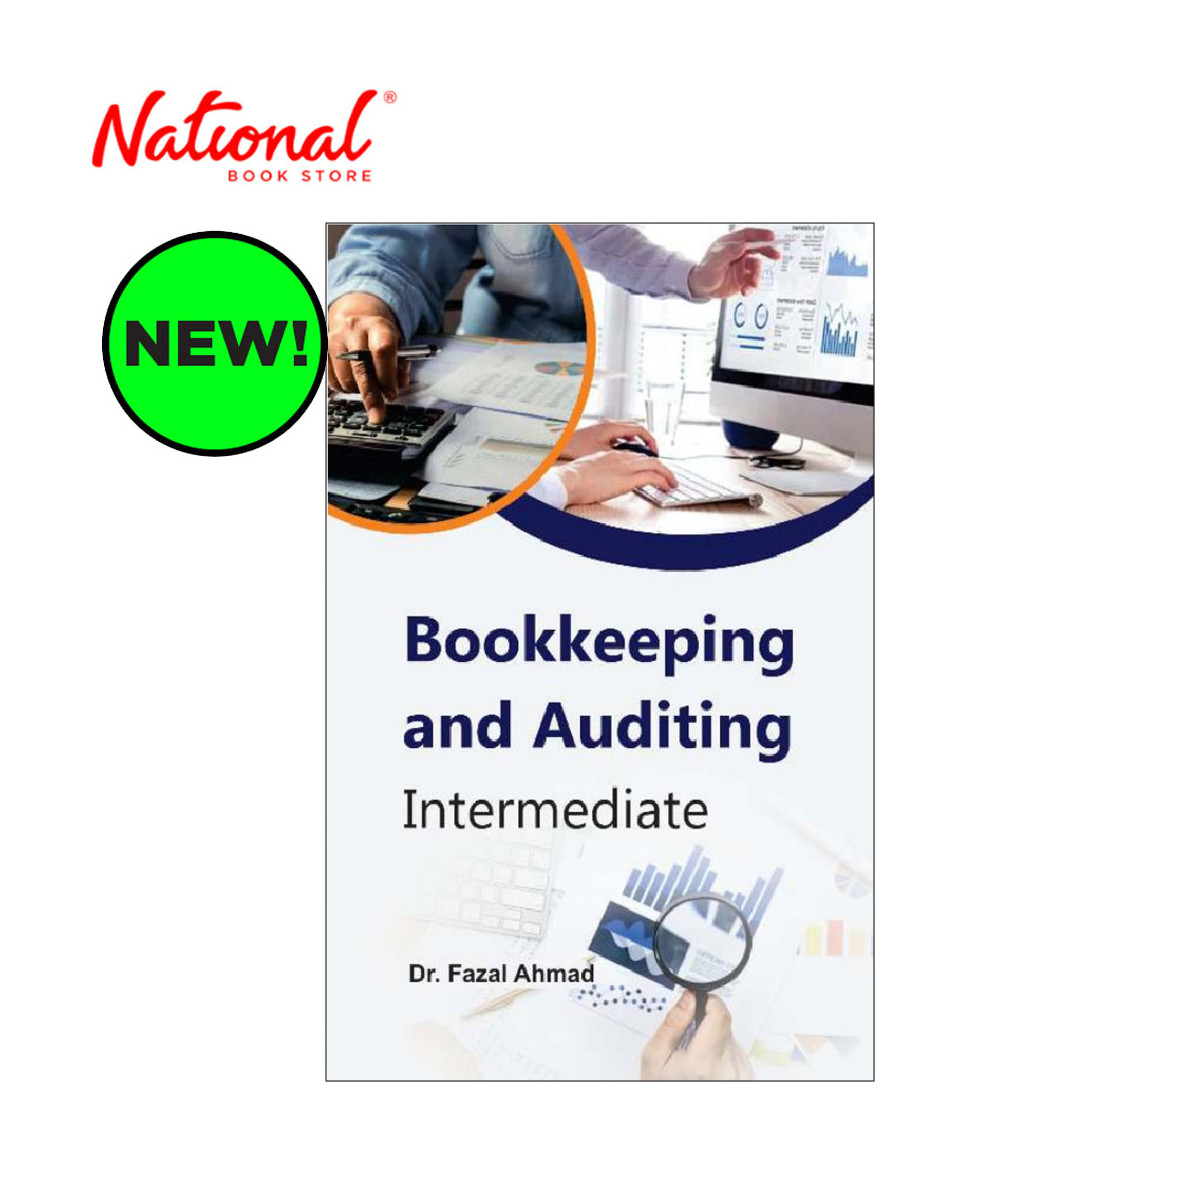 Bookkeeping and Auditing: Intermediate by Dr. Fazal Ahmad - Trade Paperback - College Books